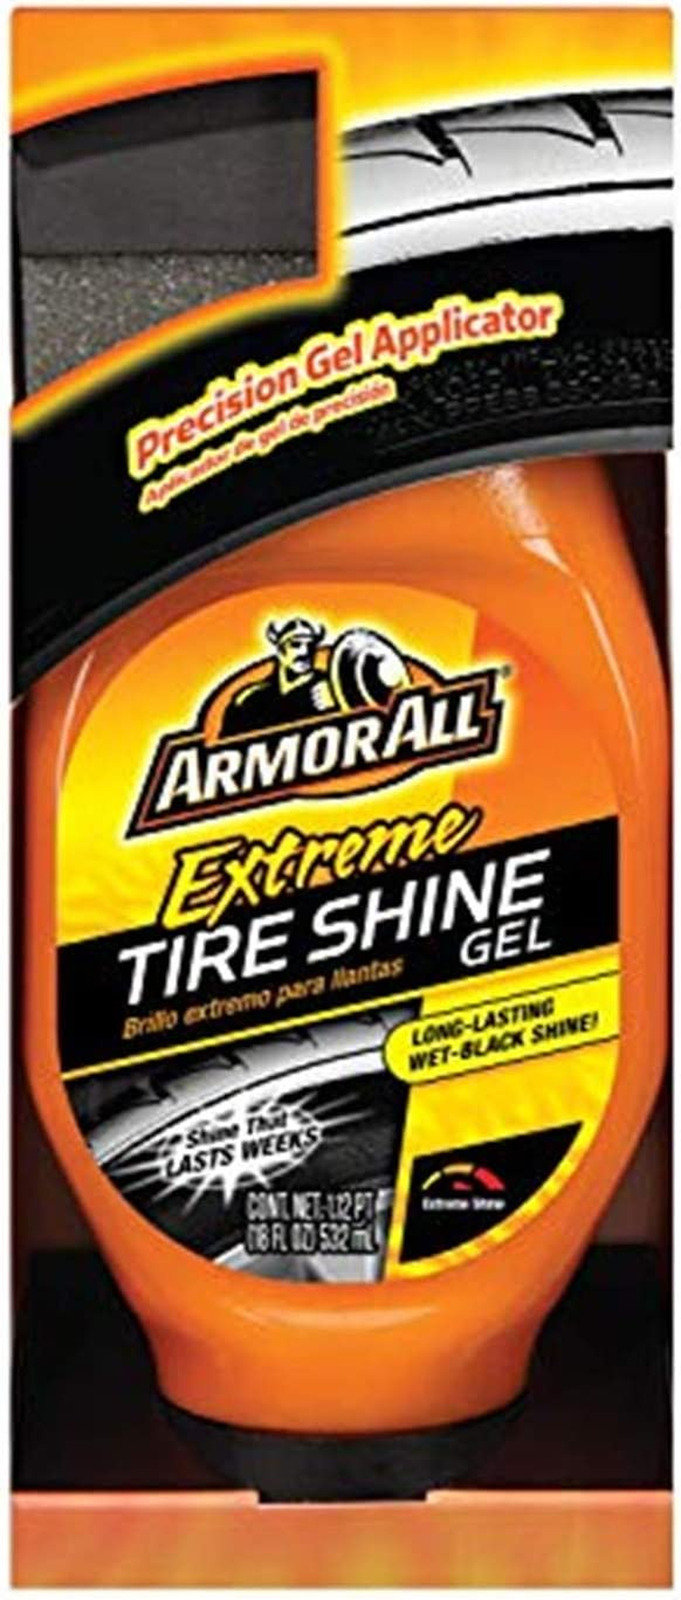 Armor All Extreme Tire Shine Gel by Armor All, Tire Shine for Restoring Color an